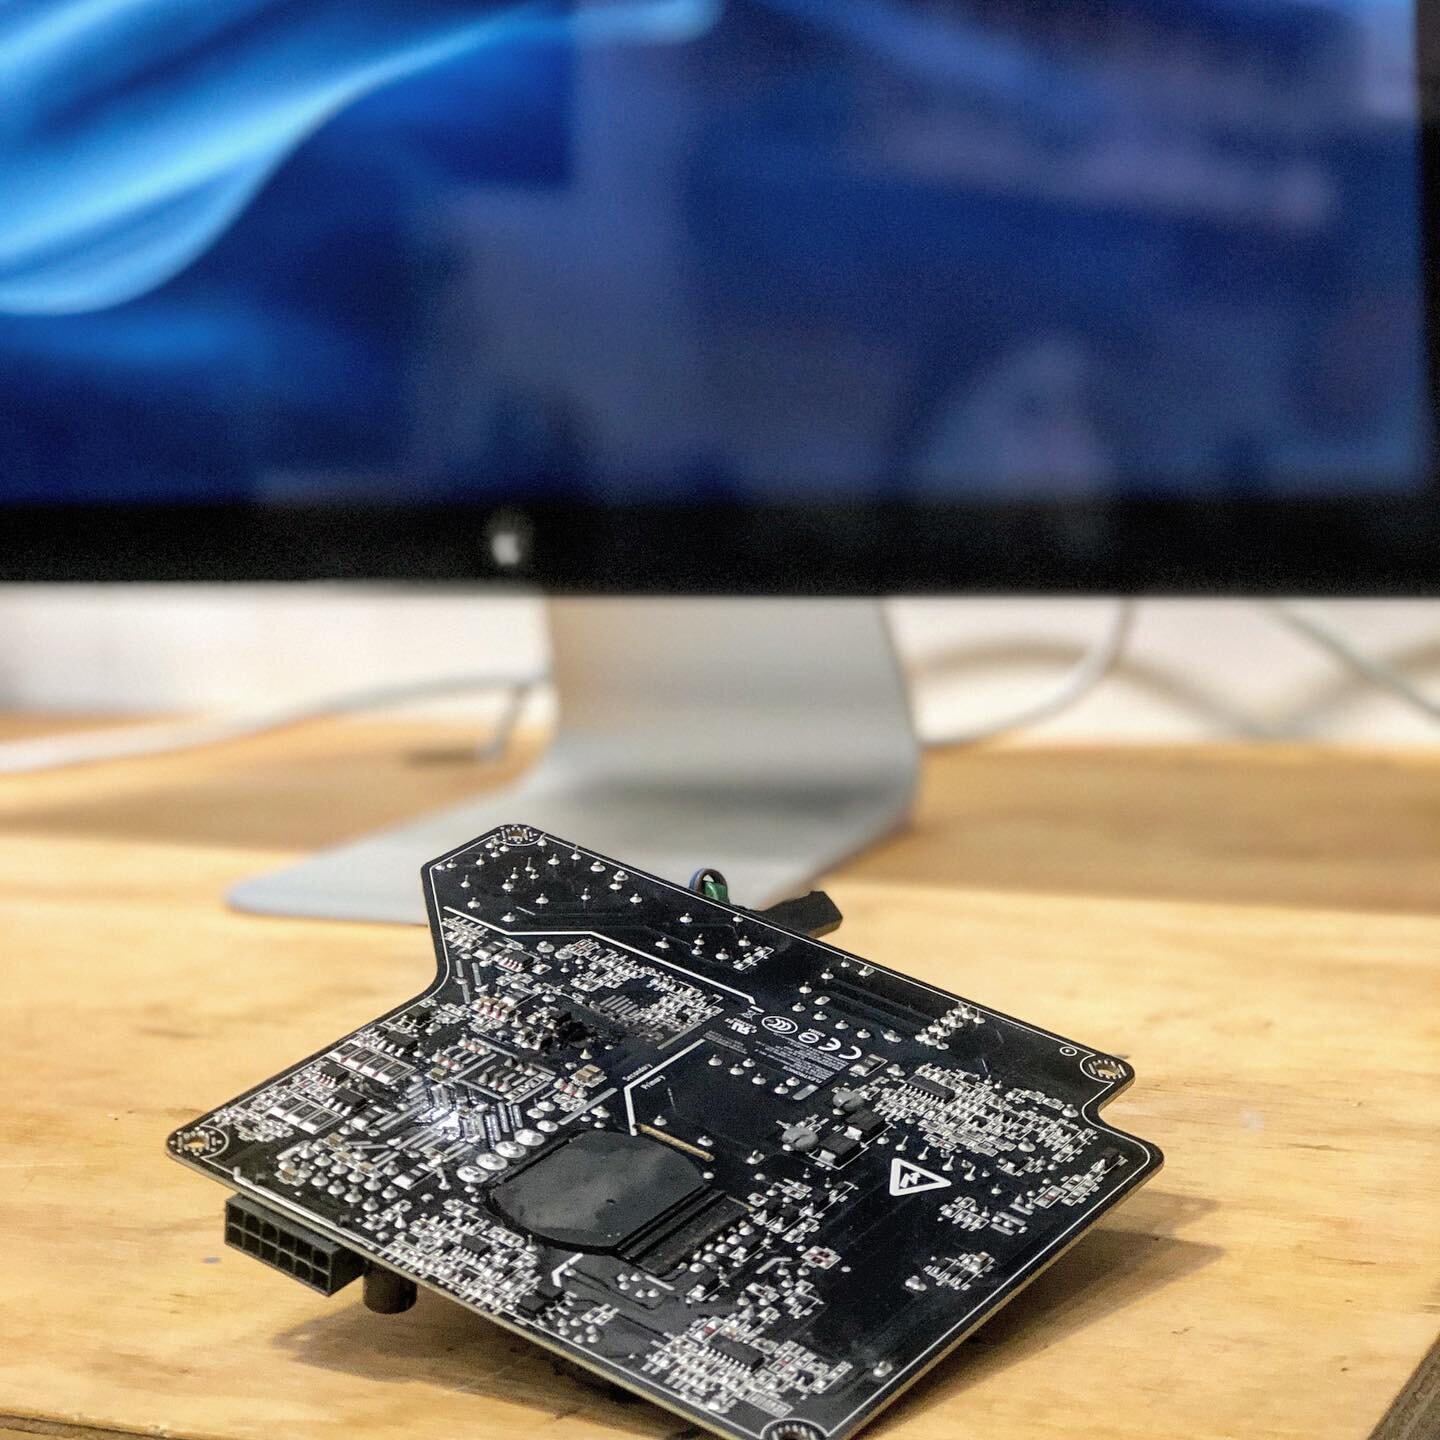 This 27&rdquo; Apple Cinema Display had a power supply meltdown. You can see where it had caught on 🔥 at one point. After replacement and rigorous testing the display is back up and running. #rocketrepair #uwmadison